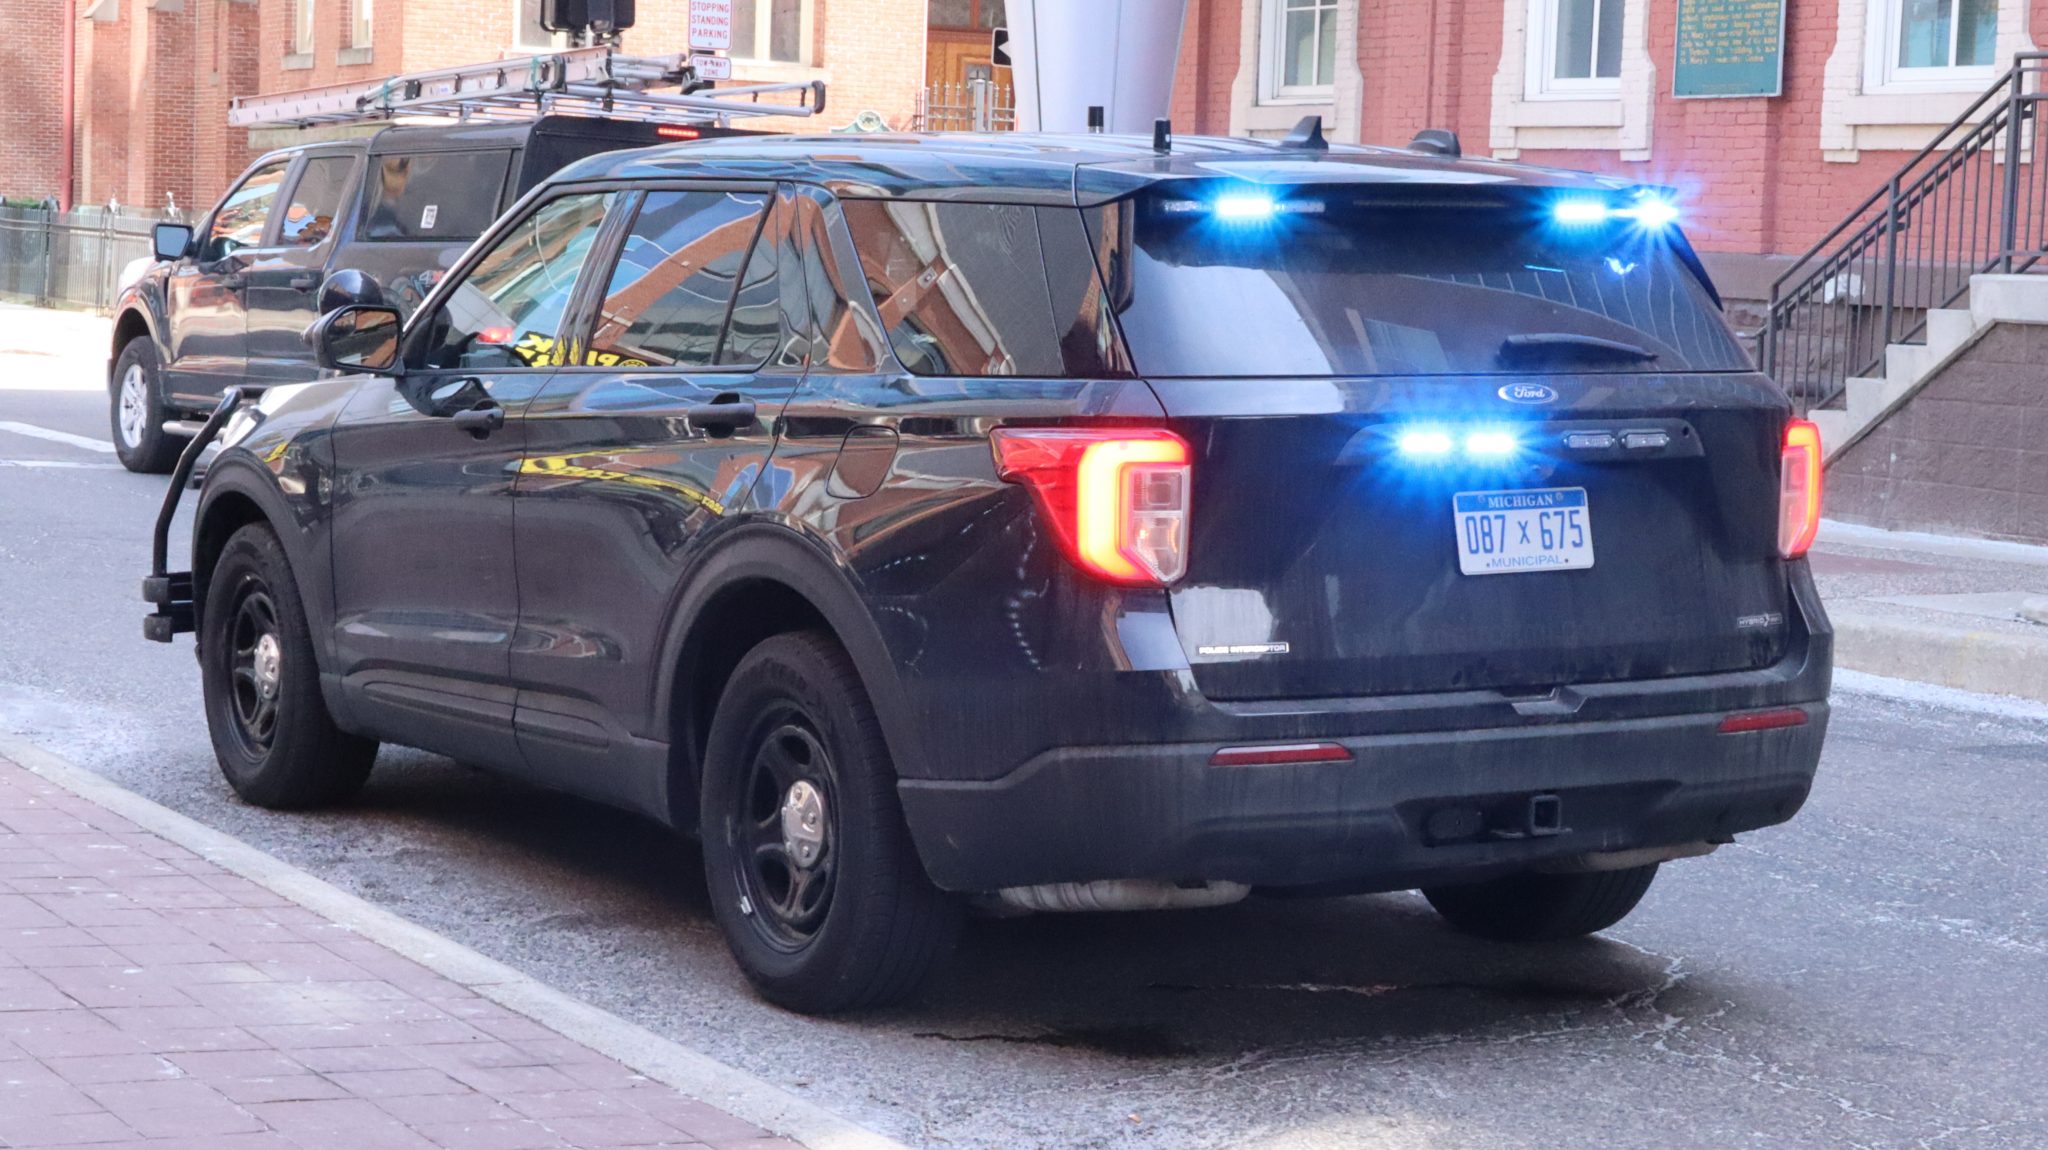 Photo of a Detroit Police vehicle.